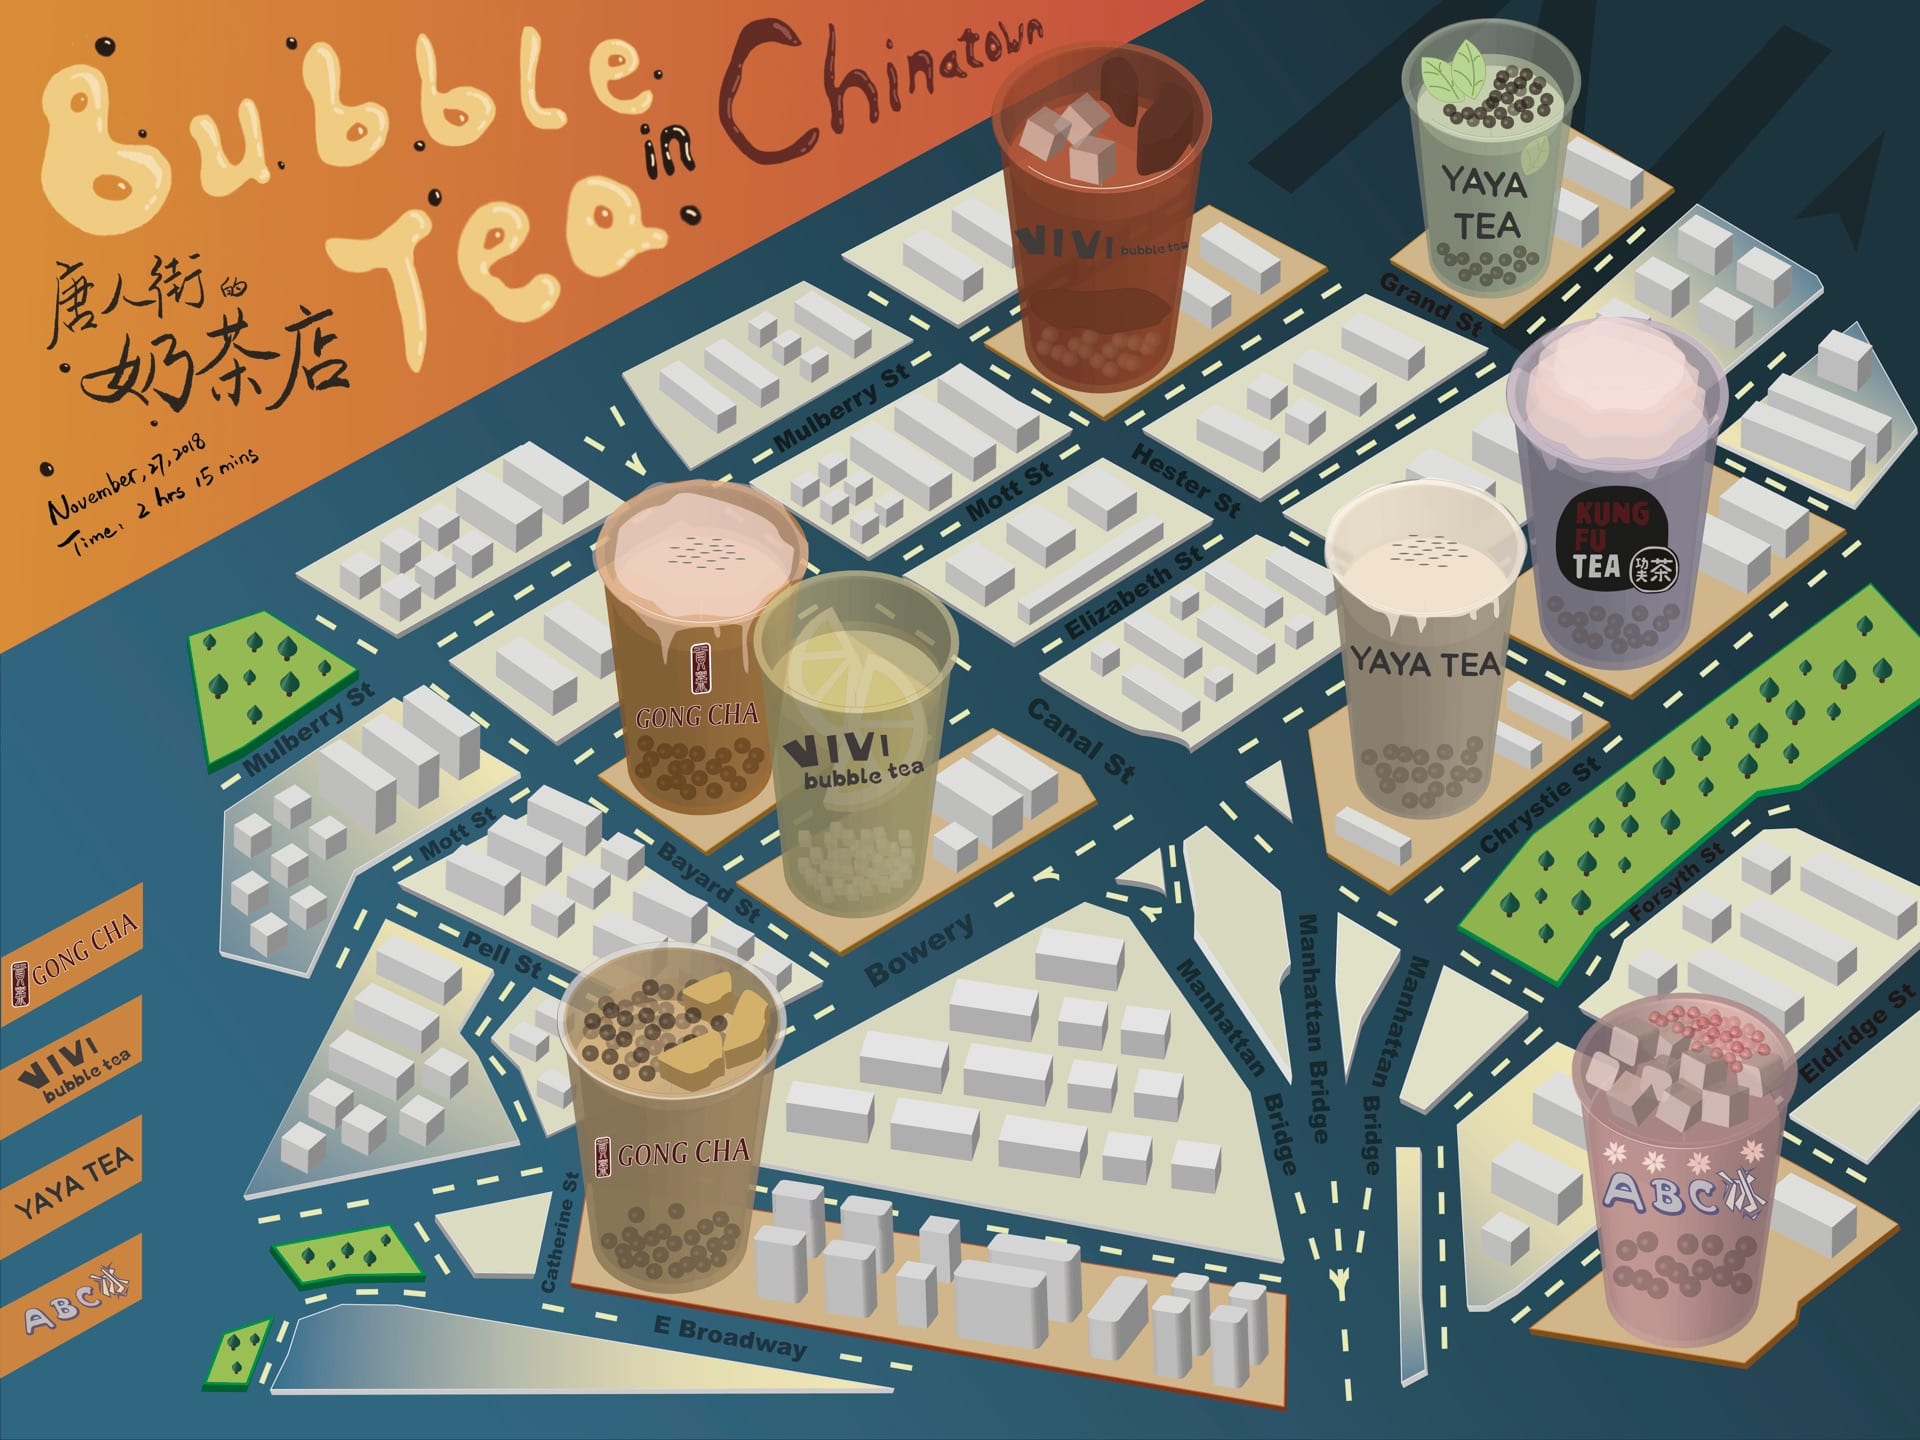 Bubble Tea map of Chinatown